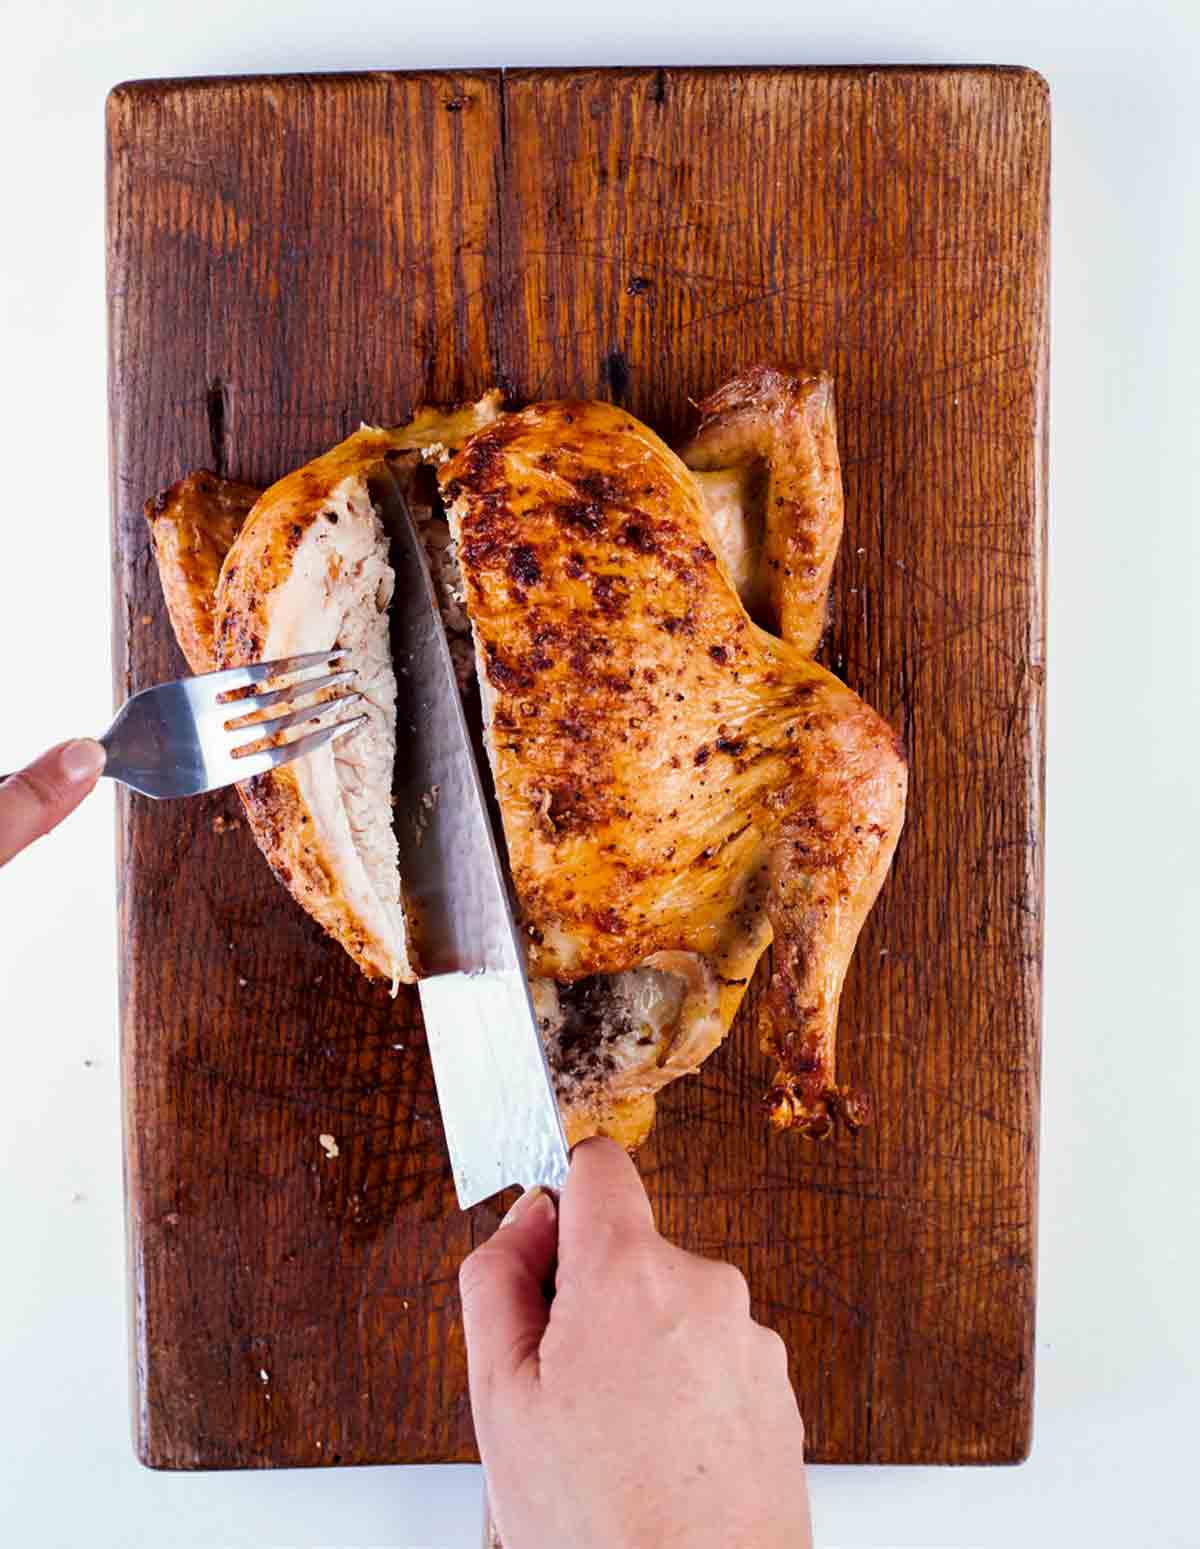 A person carving a roast chicken on a cutting board.